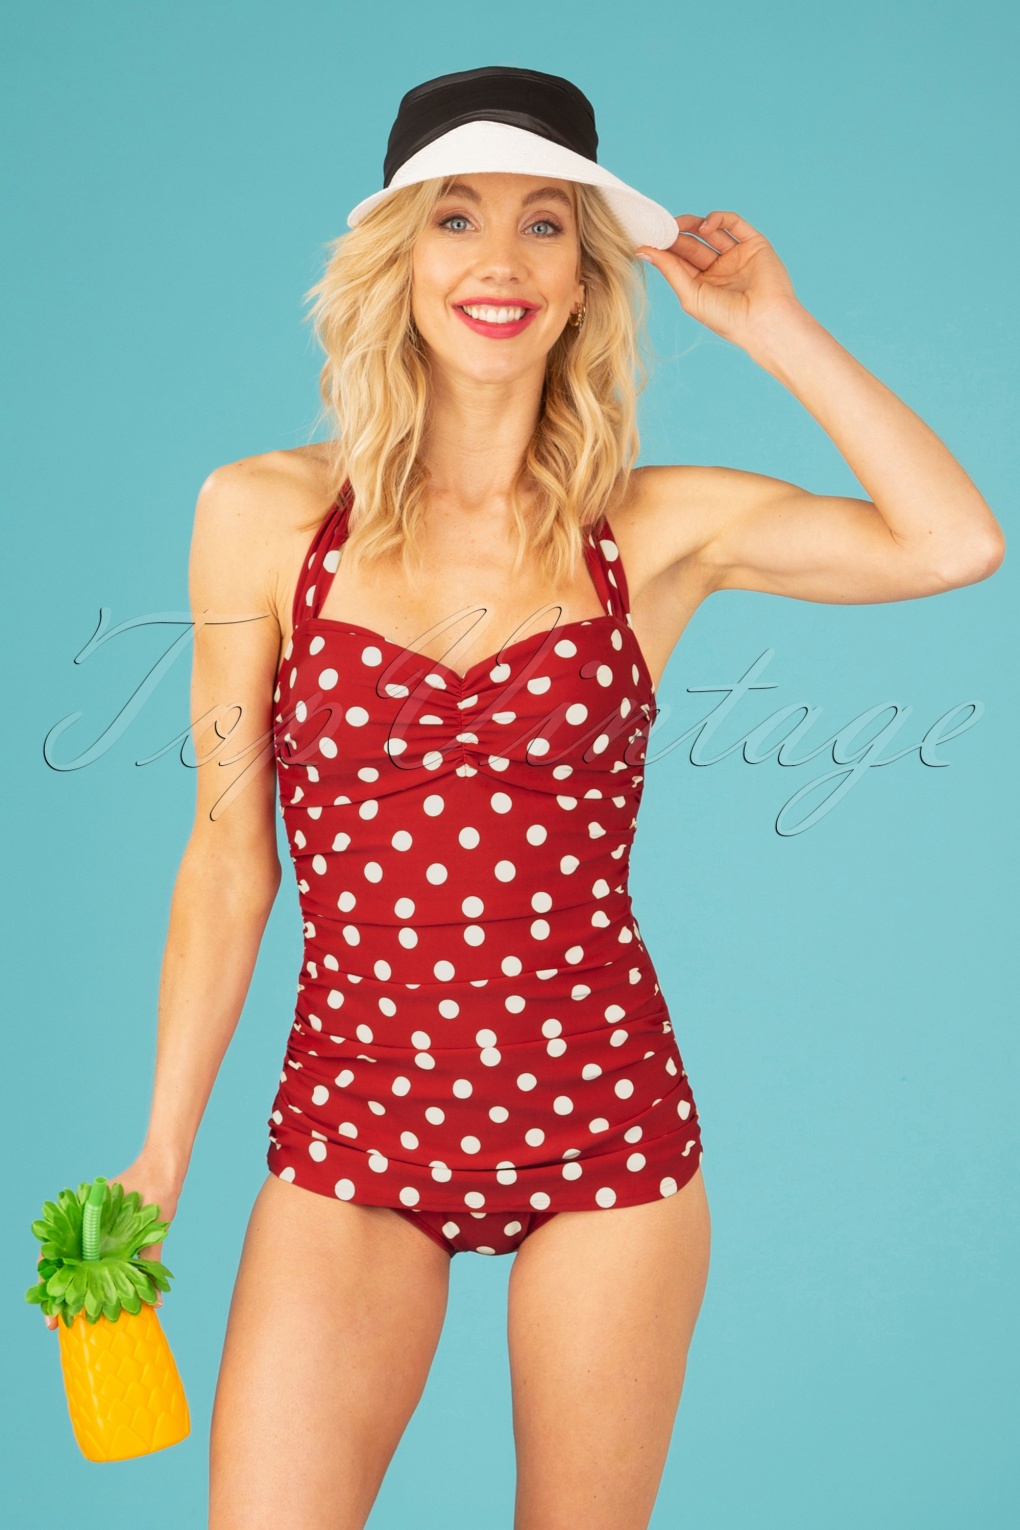 Magazijn medley operatie 50s Classic Polkadot One Piece Swimsuit in Red and White